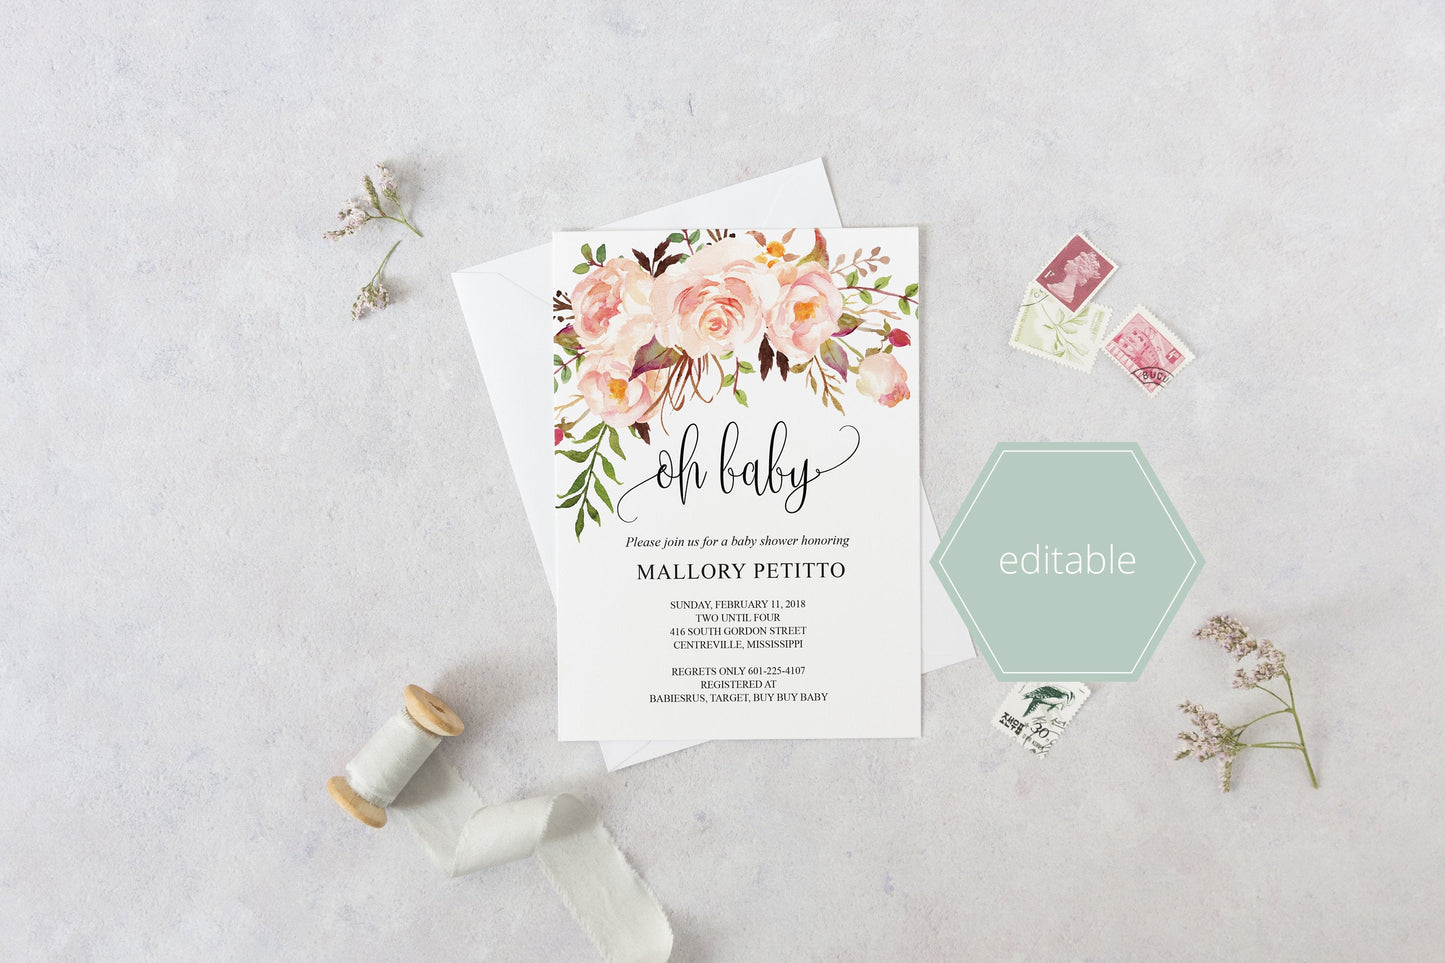 Baby Shower Invitation Template, Oh Baby, Baby Shower invite, Baby Shower Invites, Instant Download - MPU78  SAVVY PAPER CO